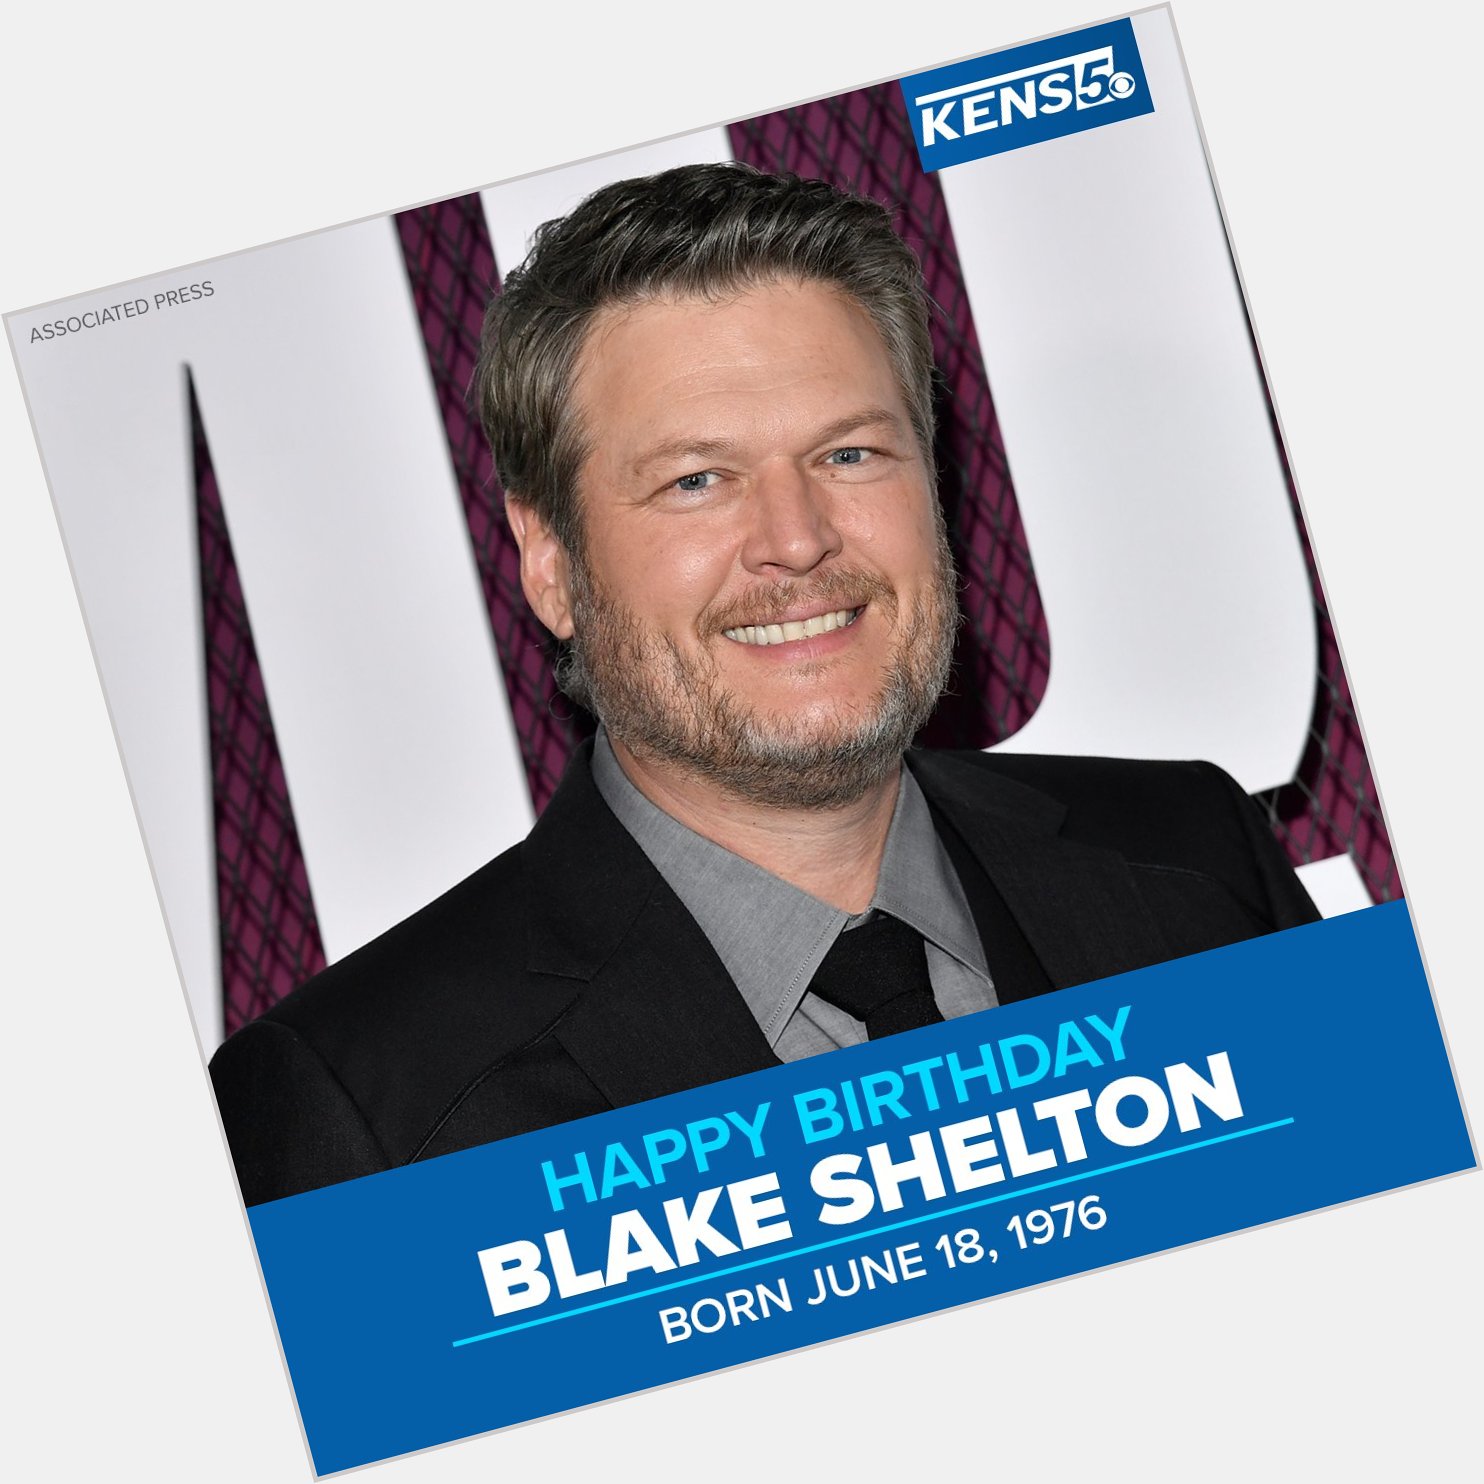 Join us in wishing a very HAPPY BIRTHDAY to Blake Shelton, who is 47 years old today.  